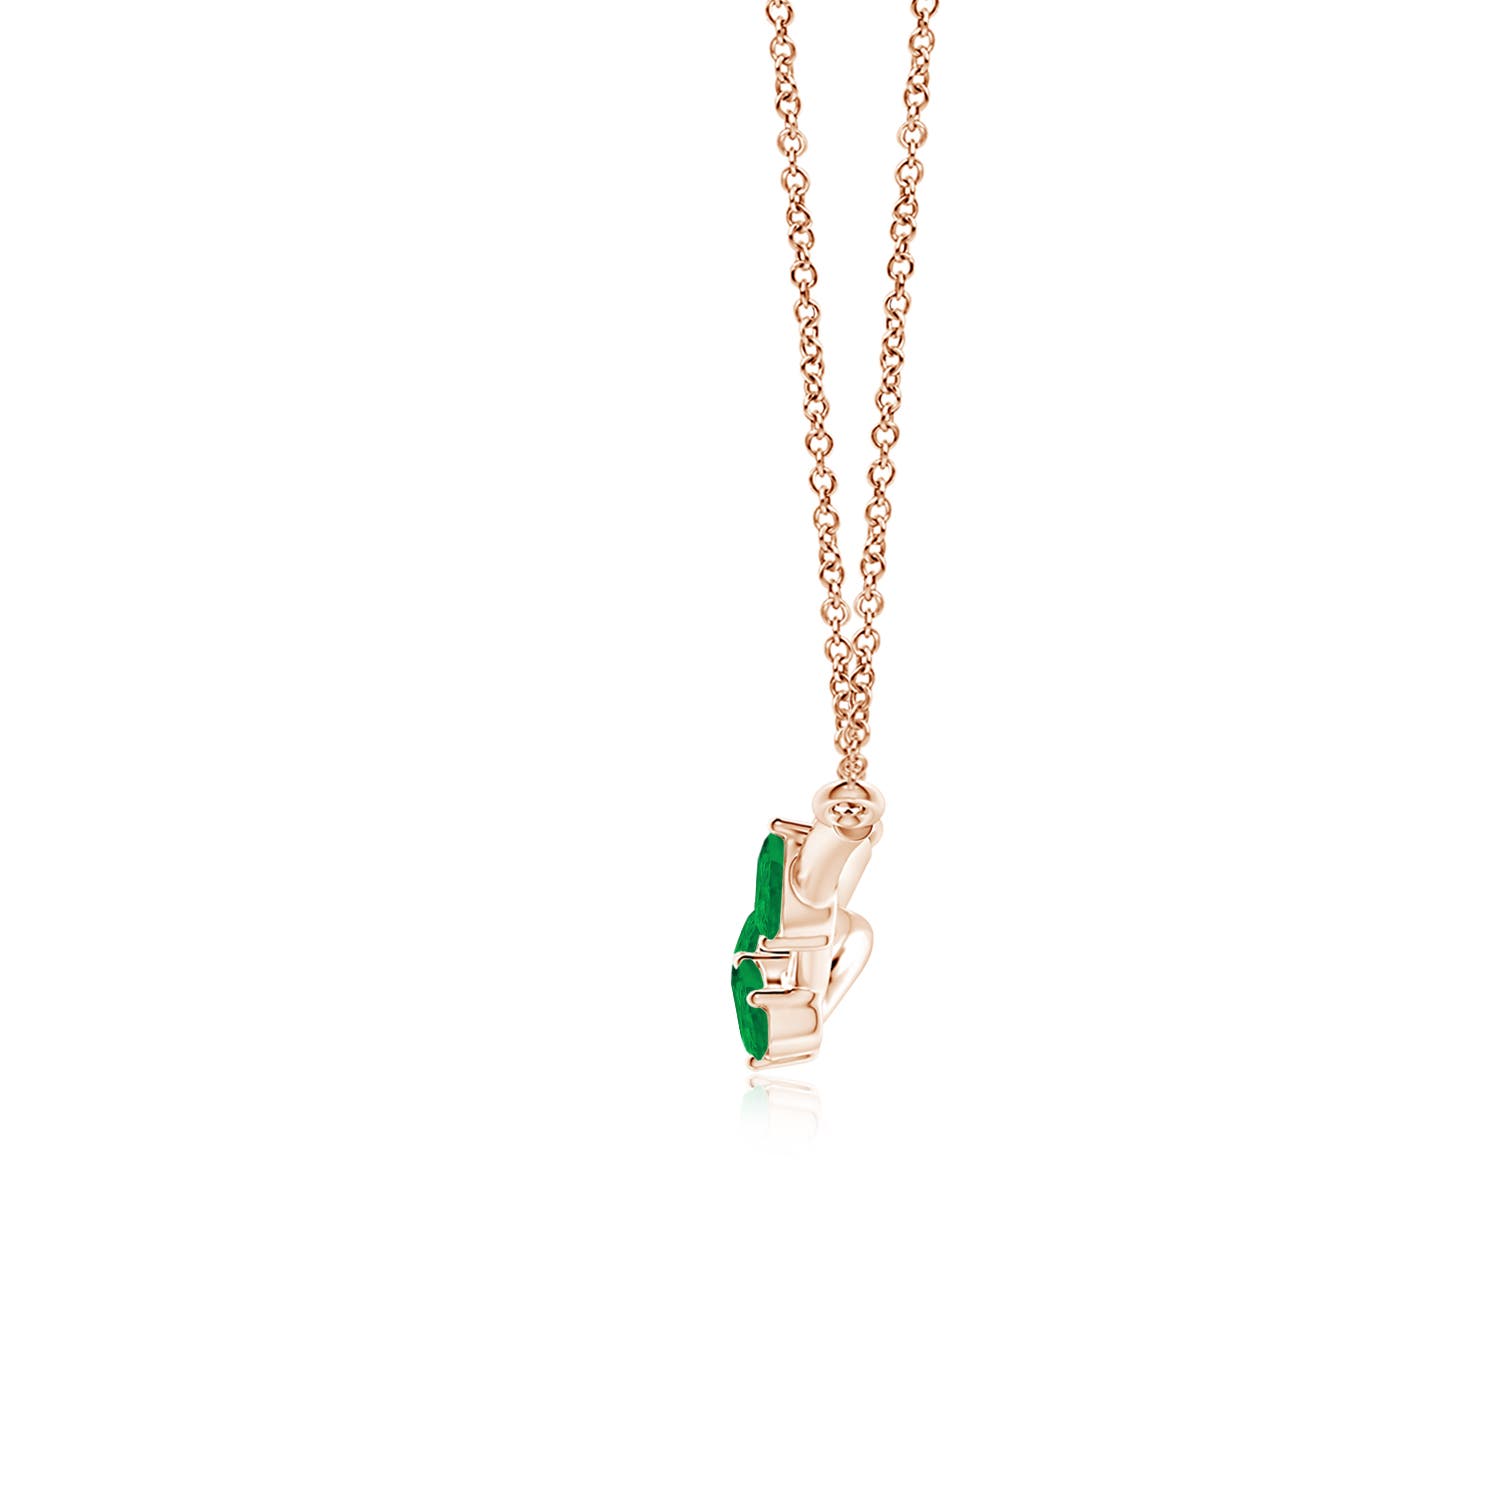 AA - Emerald / 0.6 CT / 14 KT Rose Gold